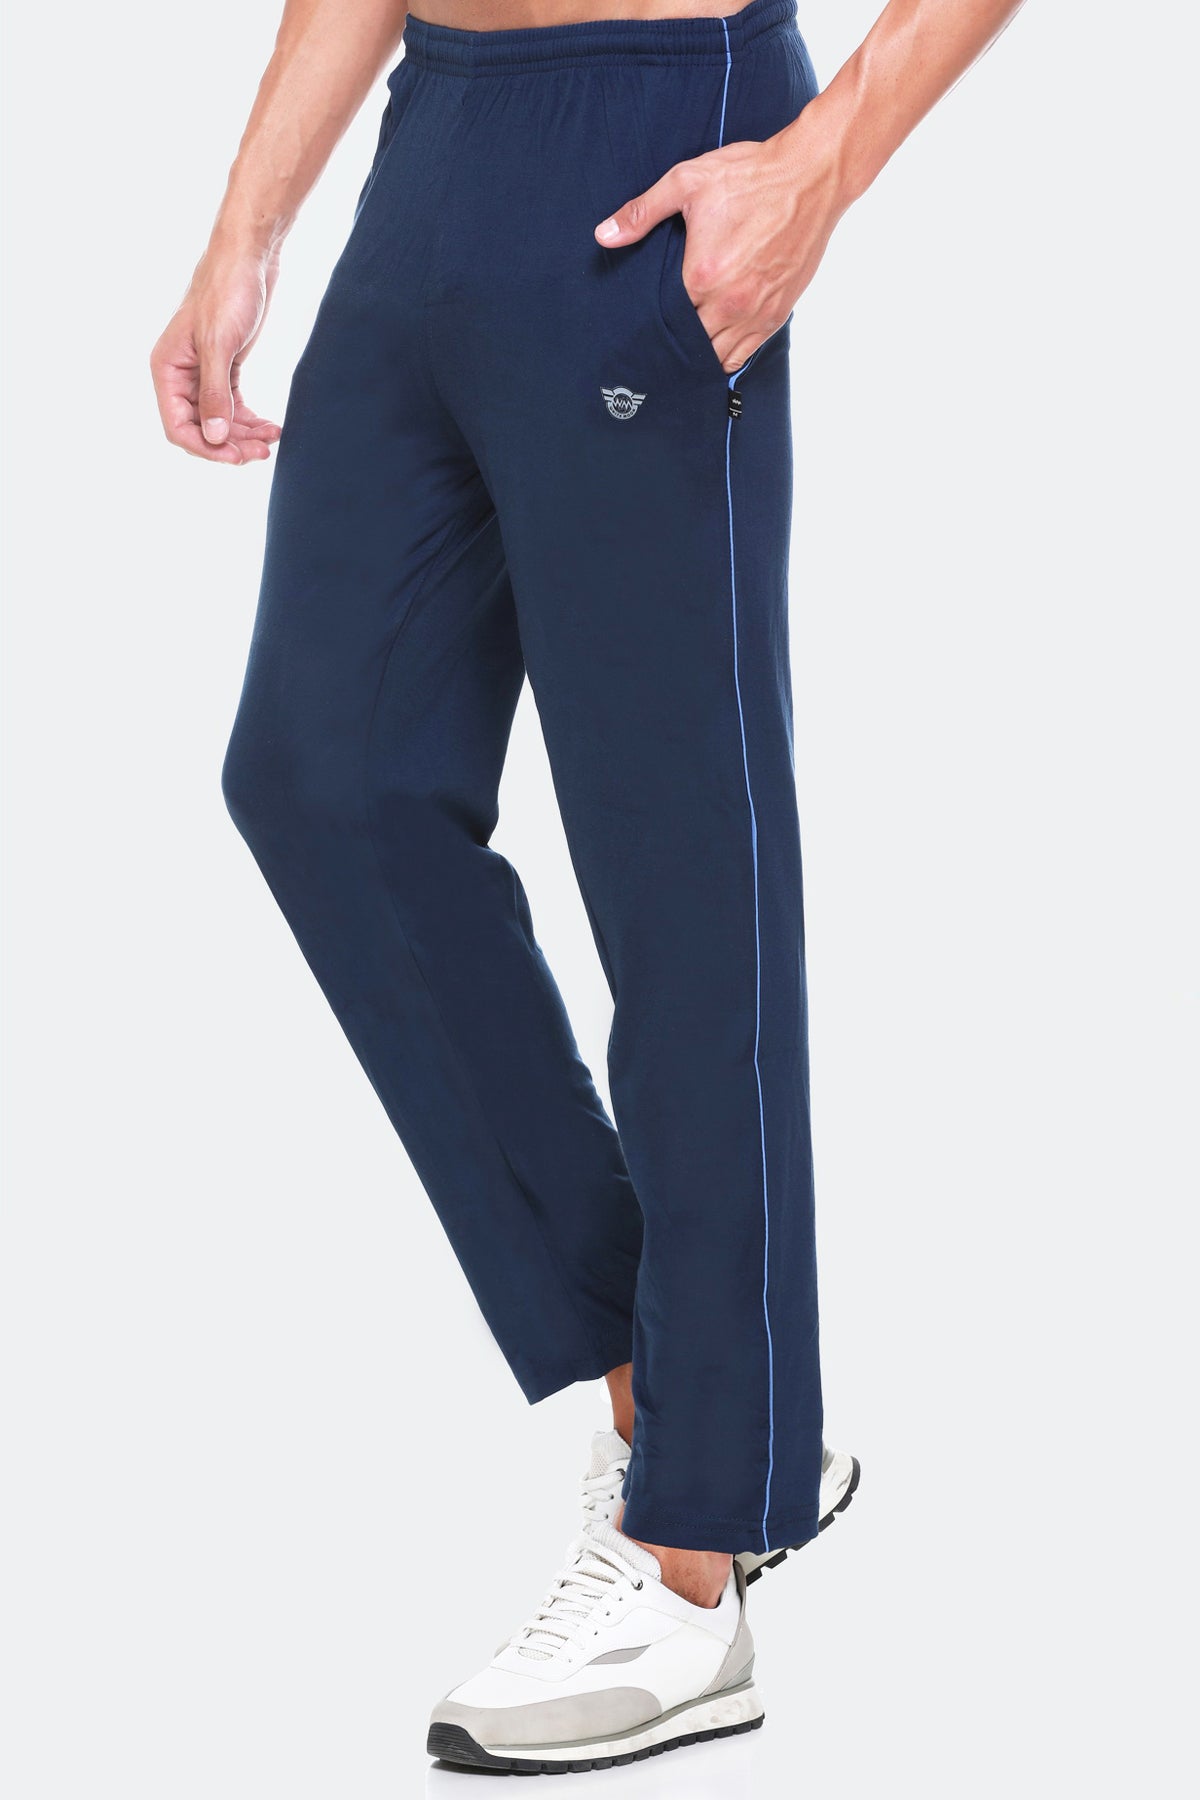 White Moon Regular Fit Cotton Track Pants Mens (Airforce) whitemoon.in